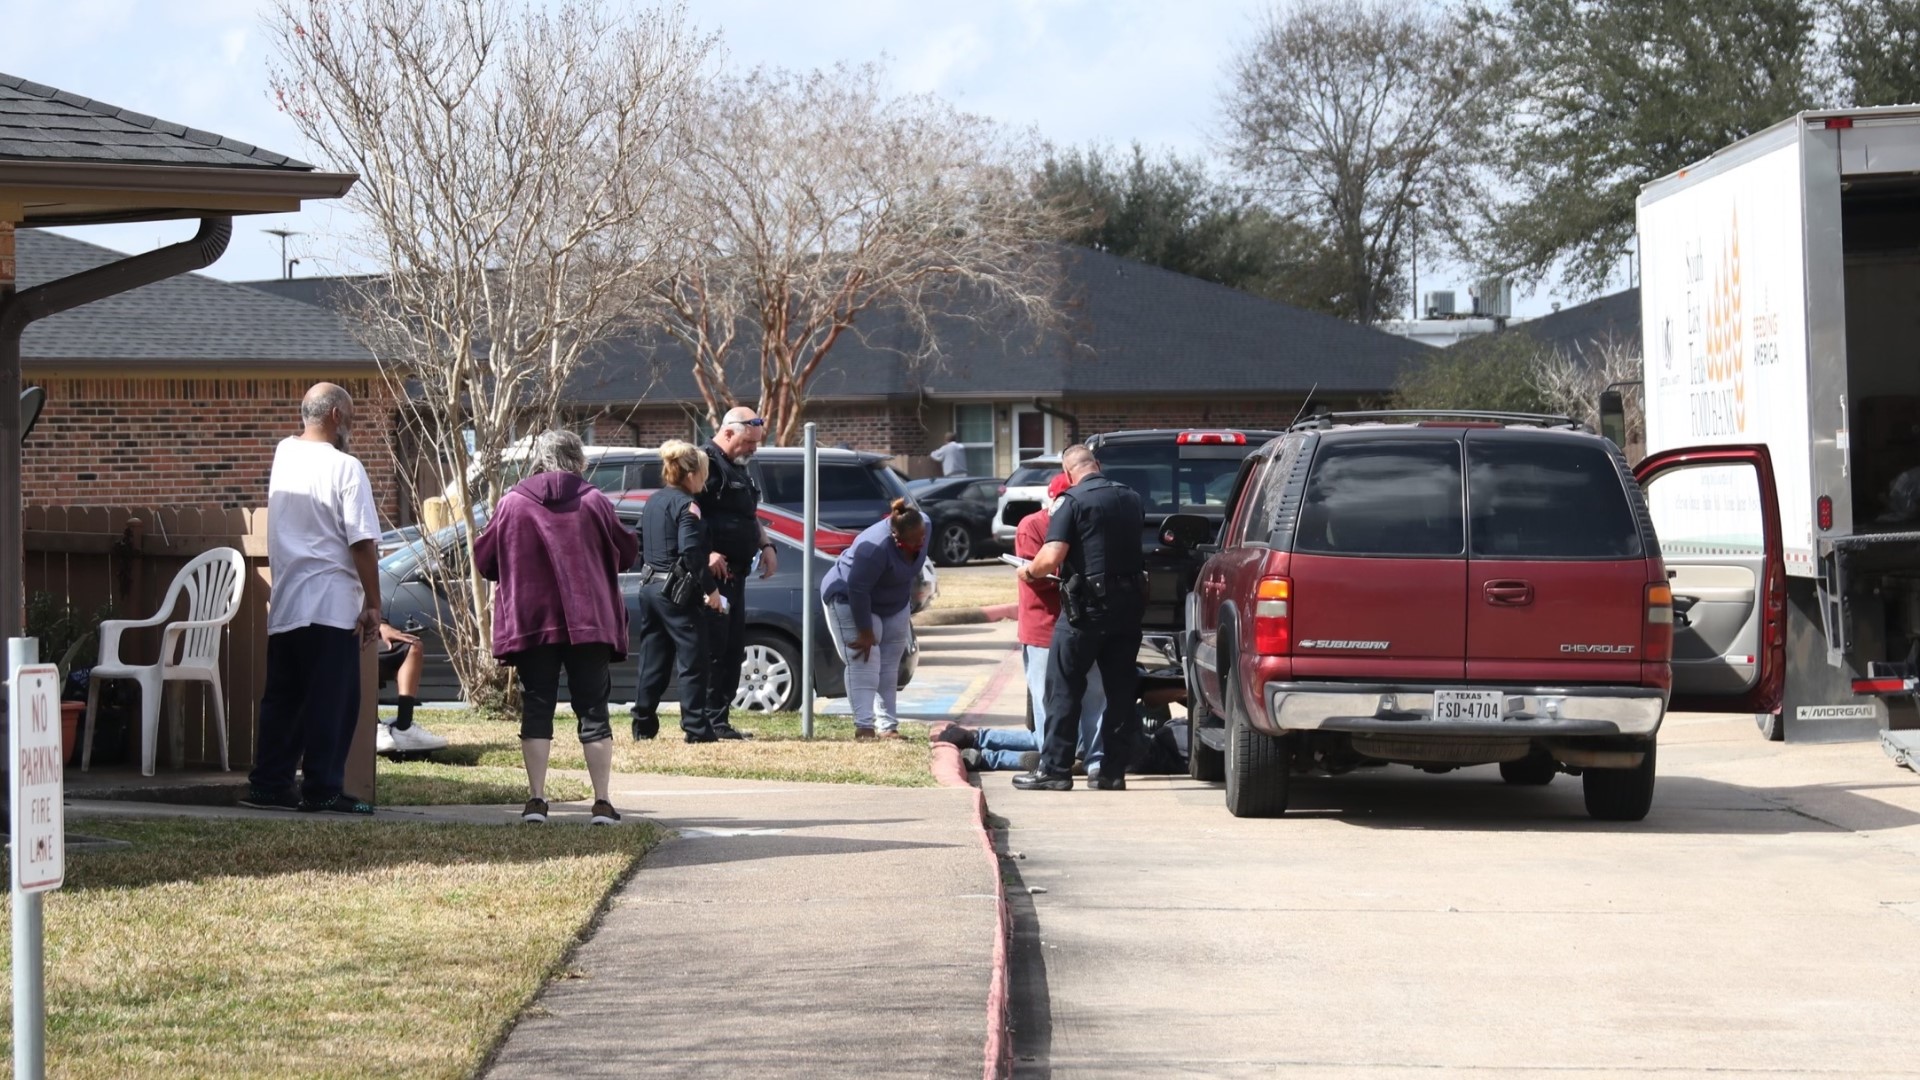 Police were called to the Crystal Creek Apartment complex on Wednesday afternoon.